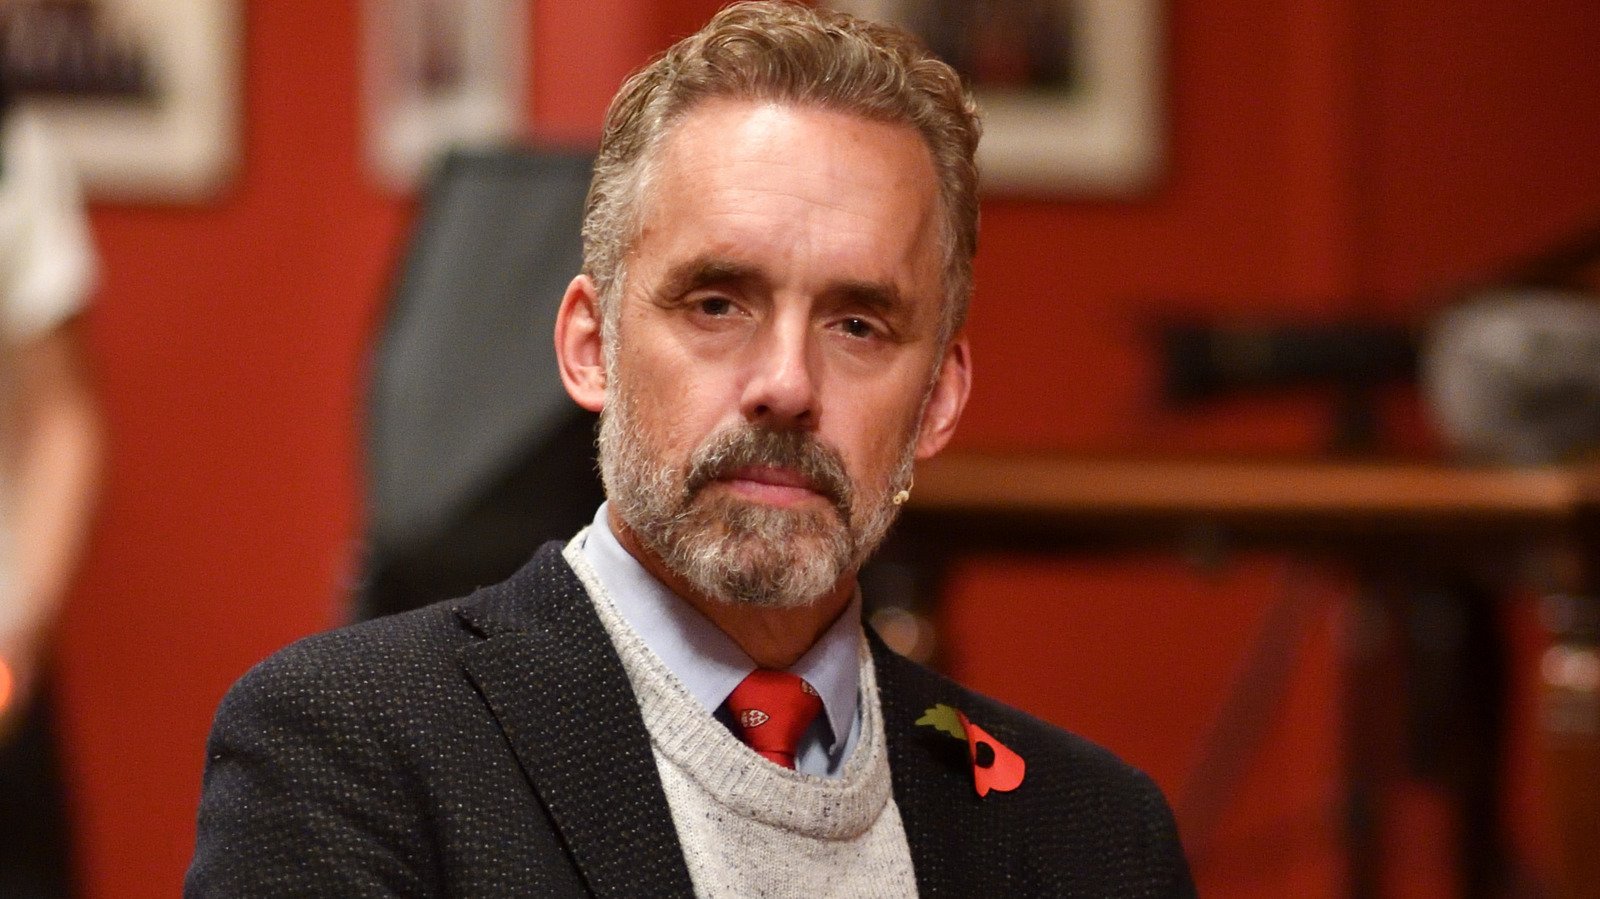 Did The Acolyte Episode 5 Really Quote Jordan Peterson?